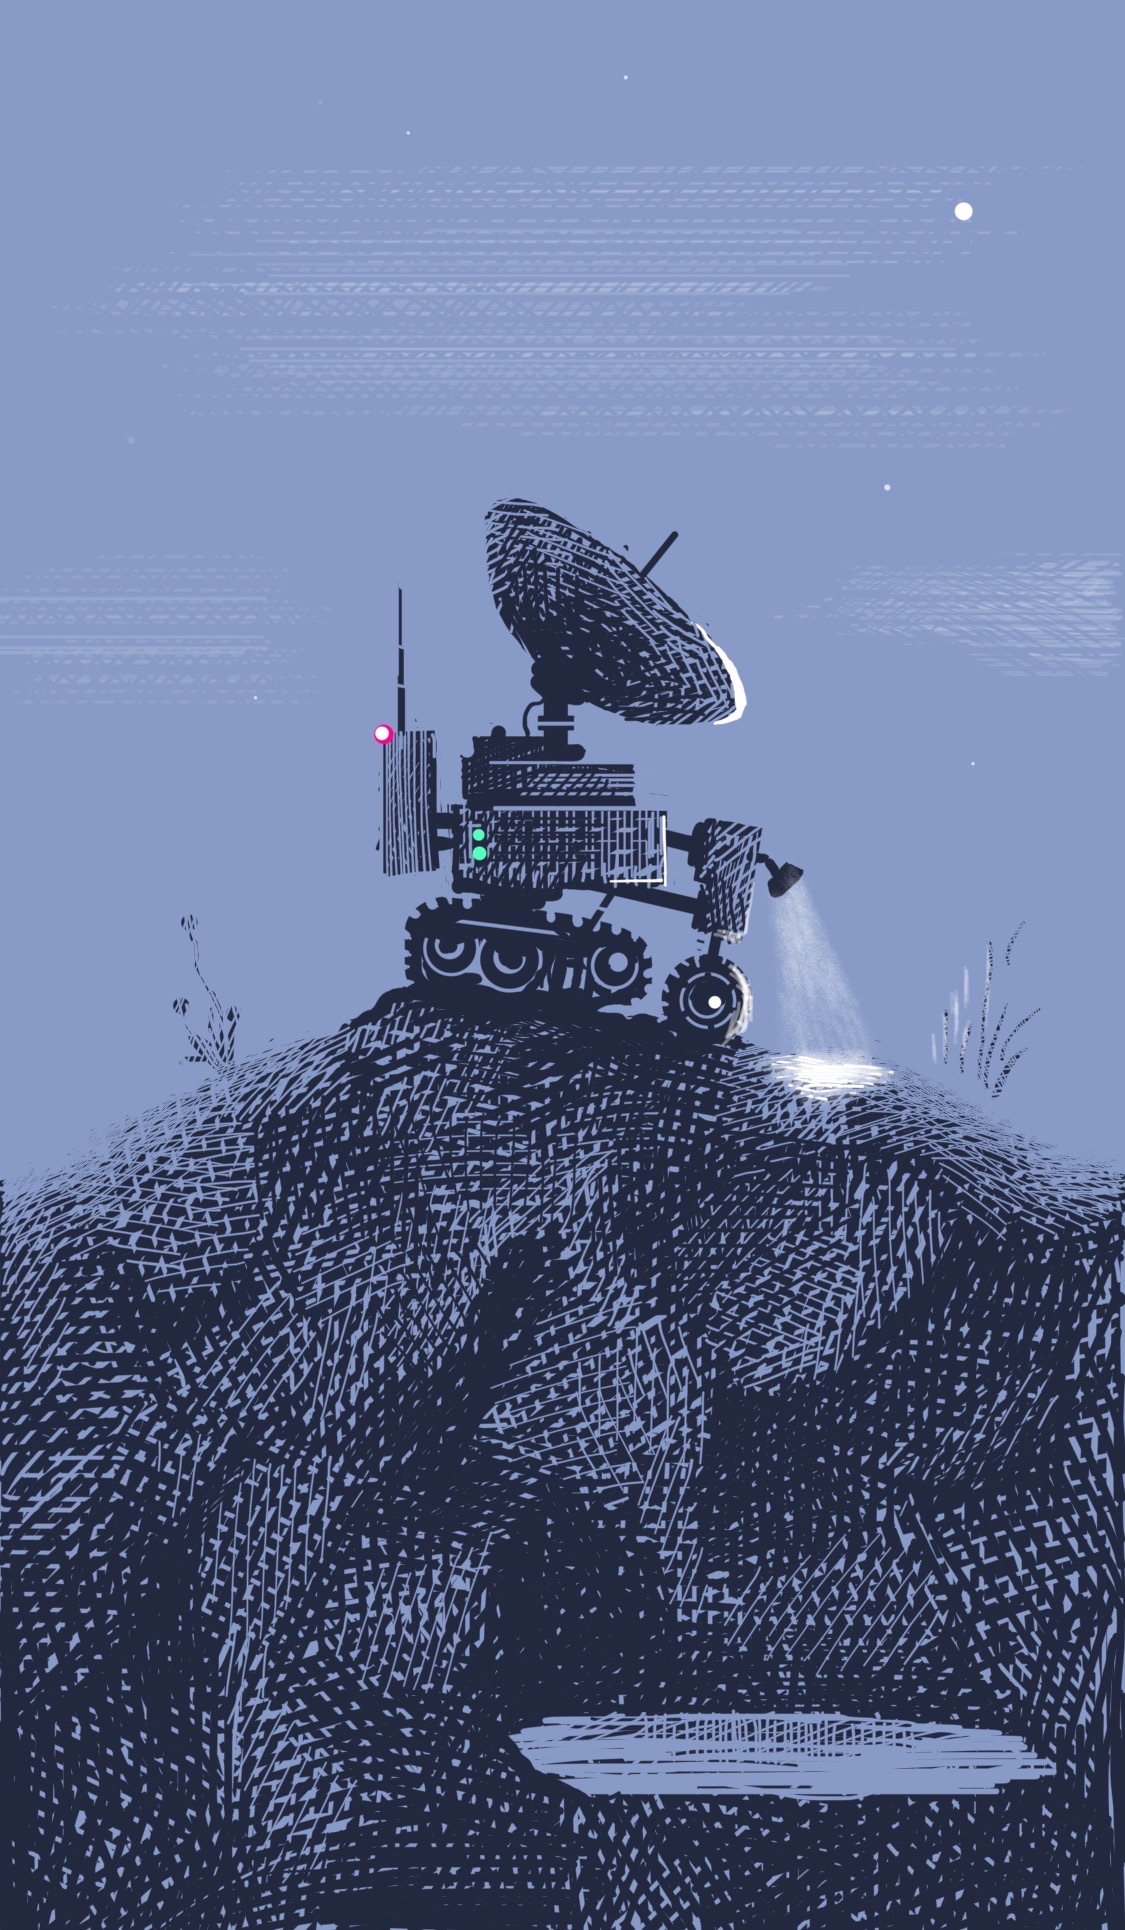 A small robot with a communications dish and a headlight drives across a mountain in the early evening.